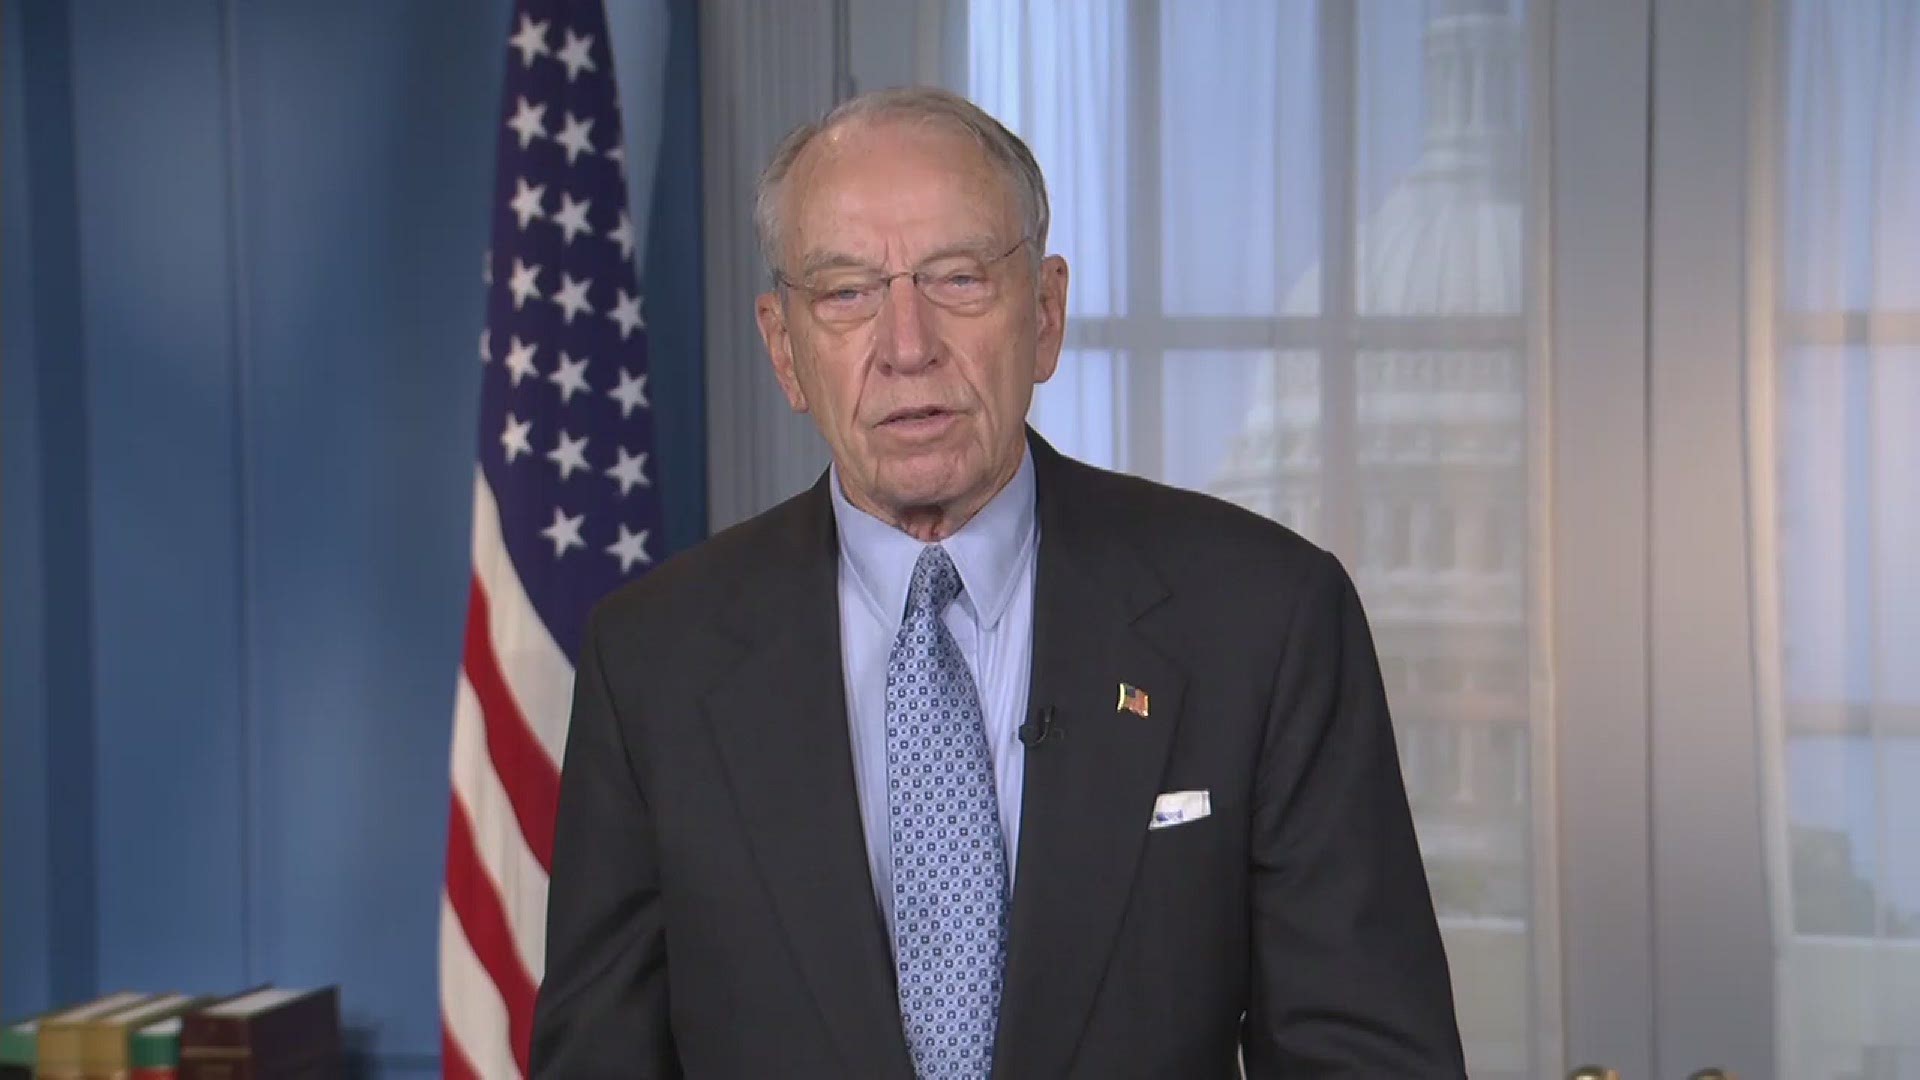 Sen. Chuck Grassley said he believes President-elect Joe Biden should have access to the same national security briefings provided to President Trump.